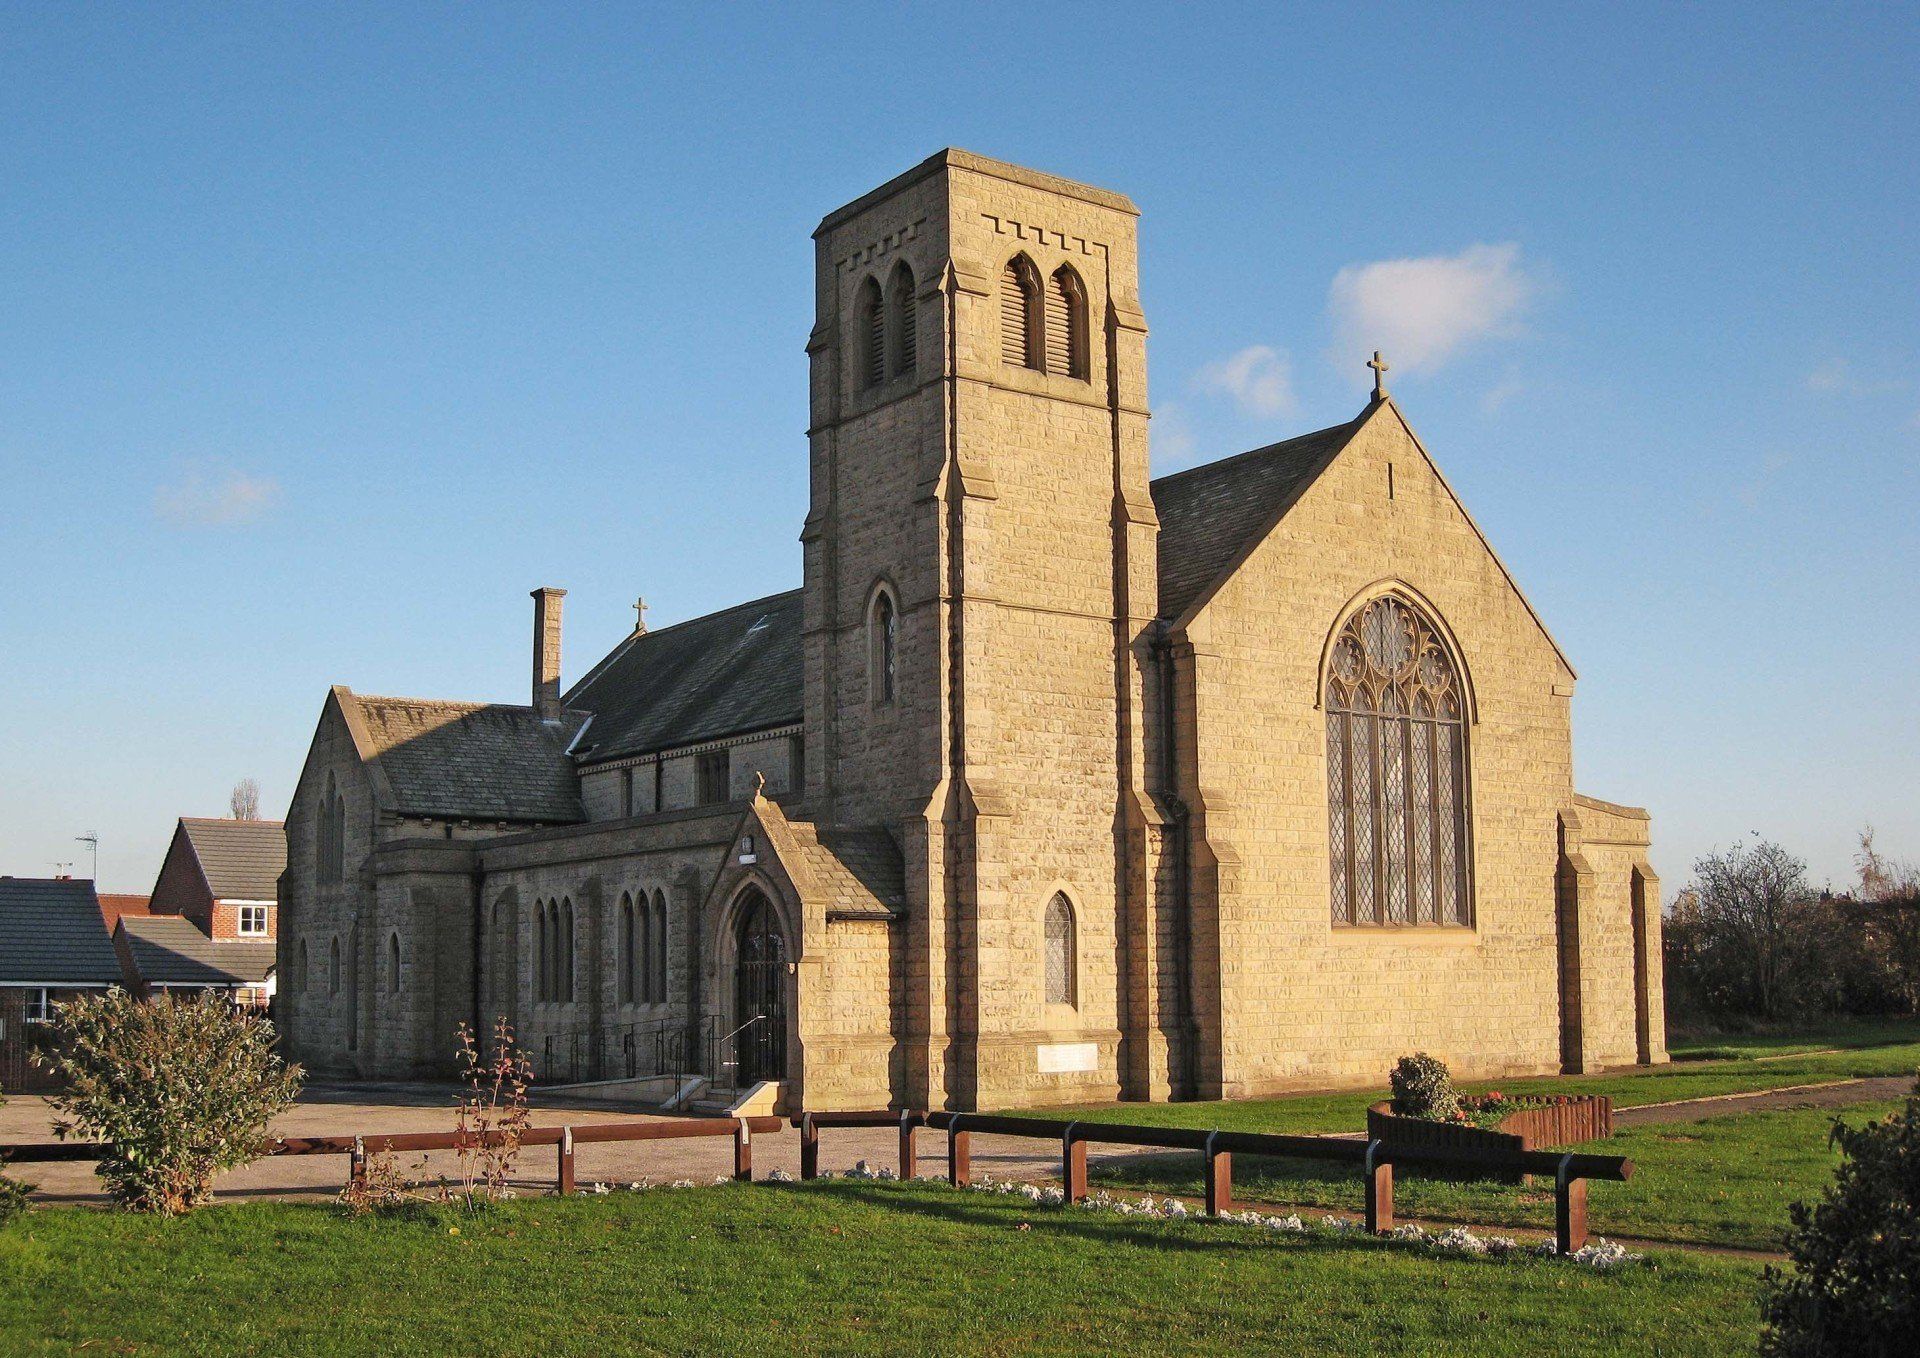 The St Simon and St Jude Church in the village of Thurcroft, near Rotherham